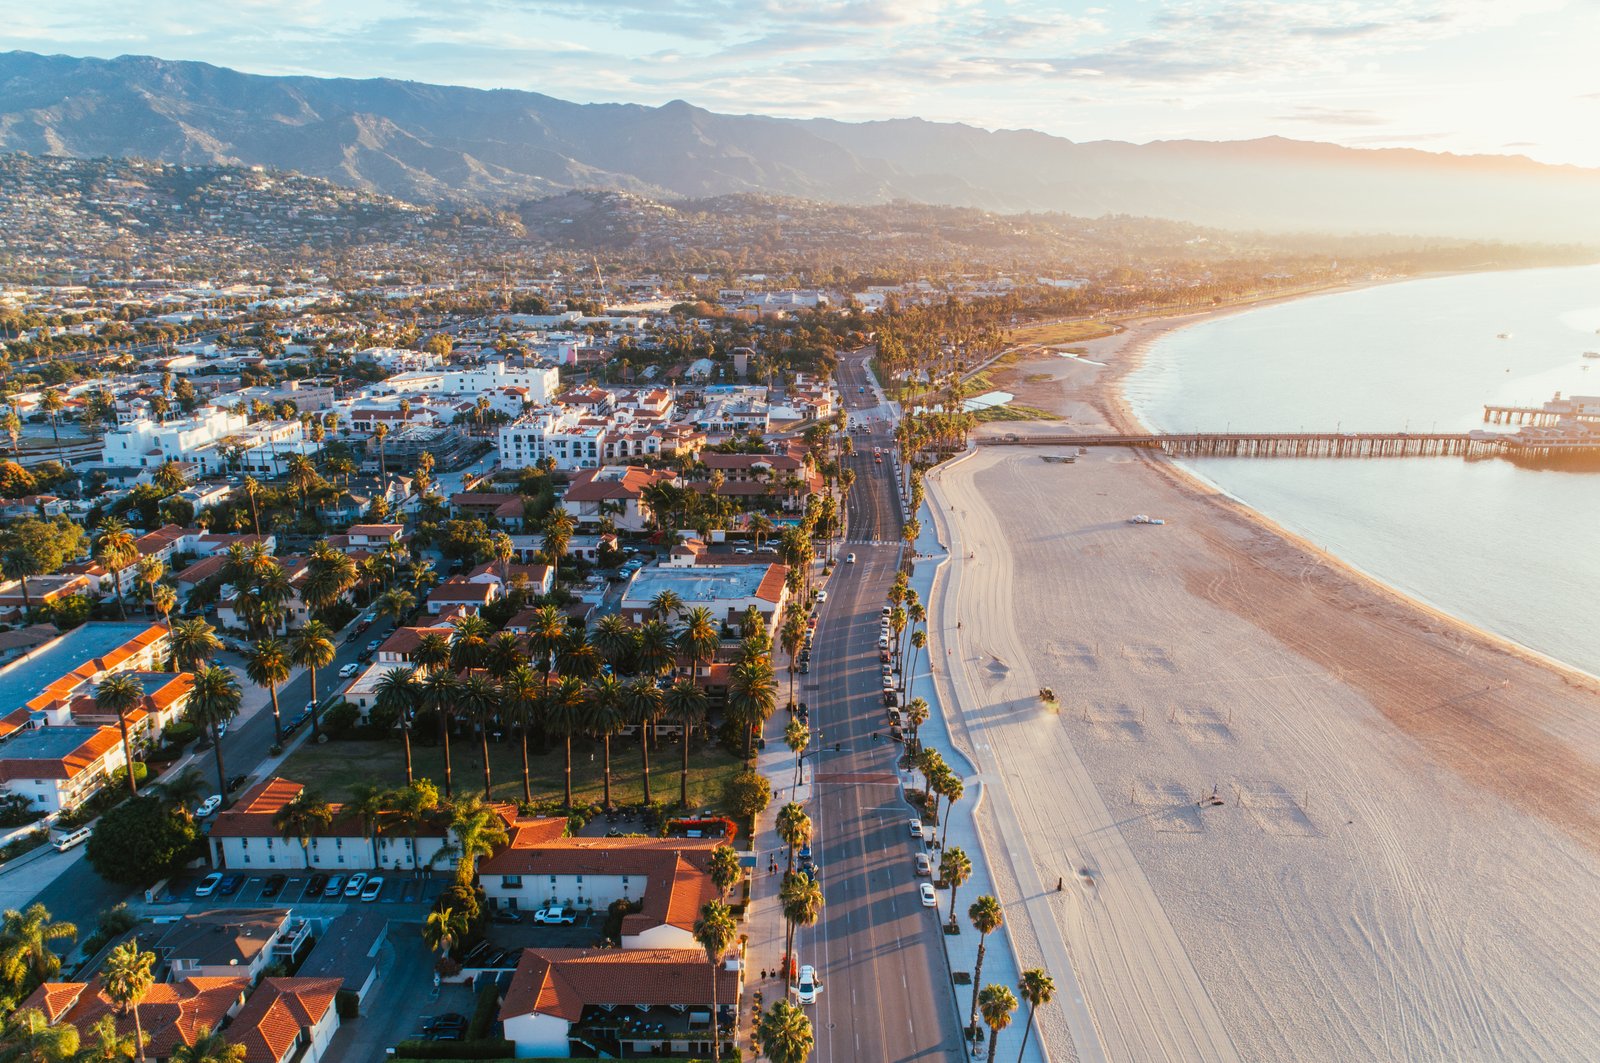 Santa Barbara Offers Sun, Sand, and Salt Caves – Where to Stay, Play, and Dine